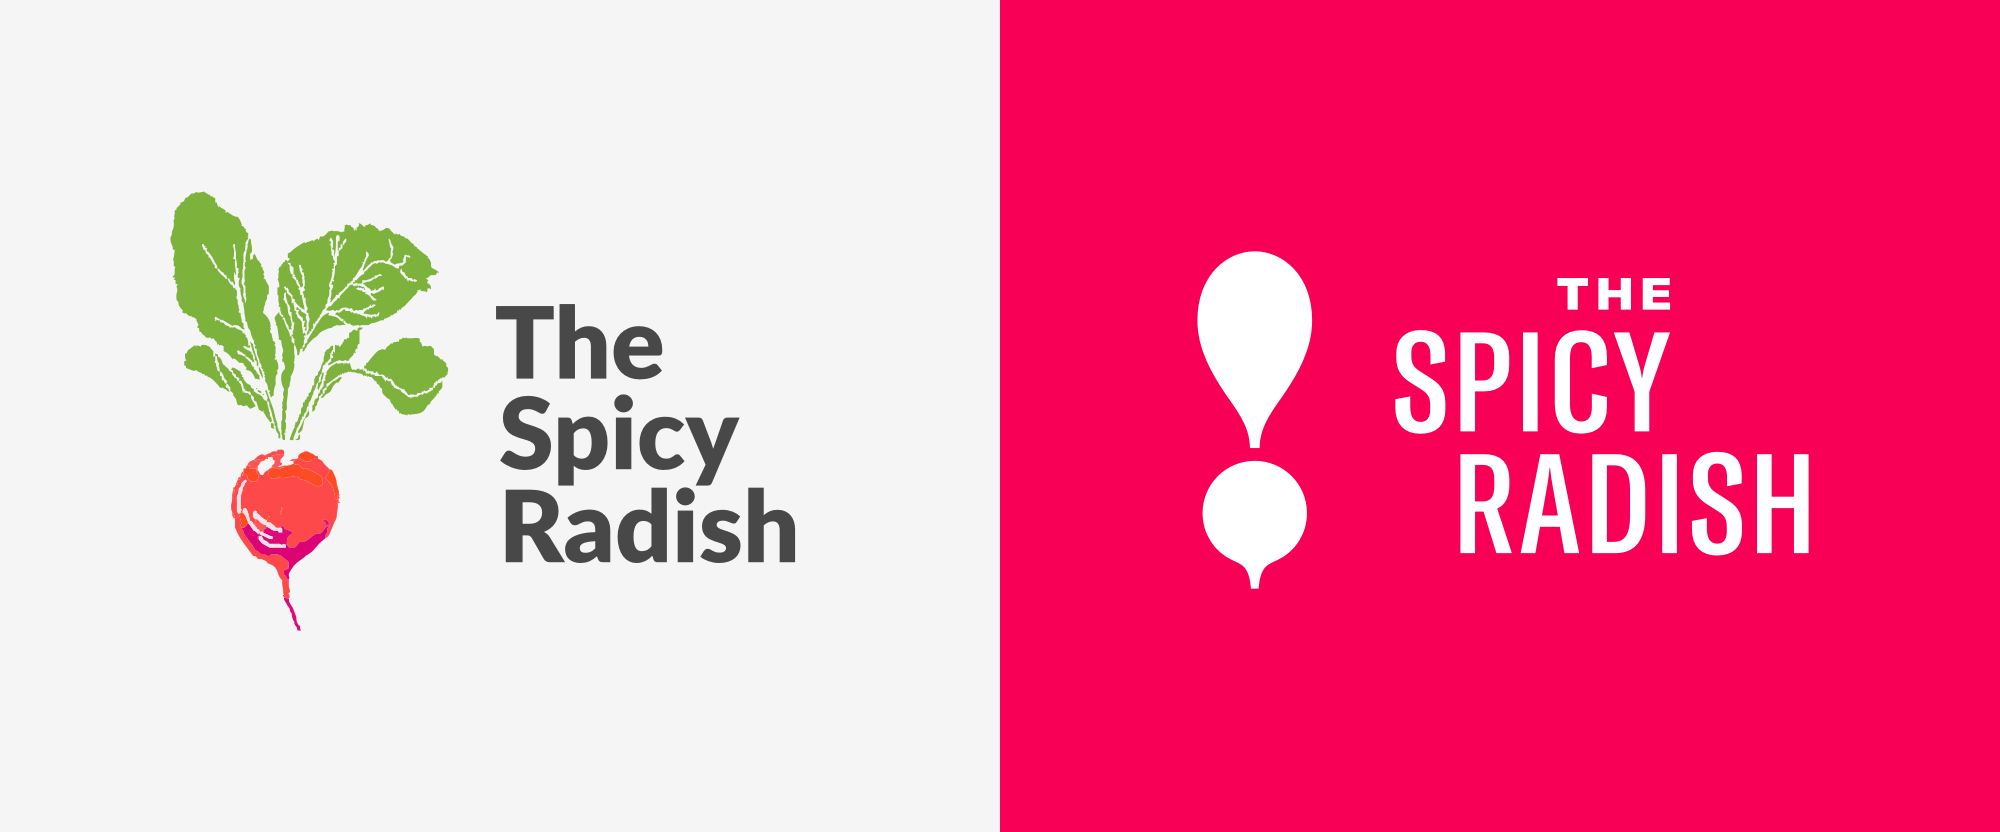 New Logo and Identity for The Spicy Radish by Cast Iron Design